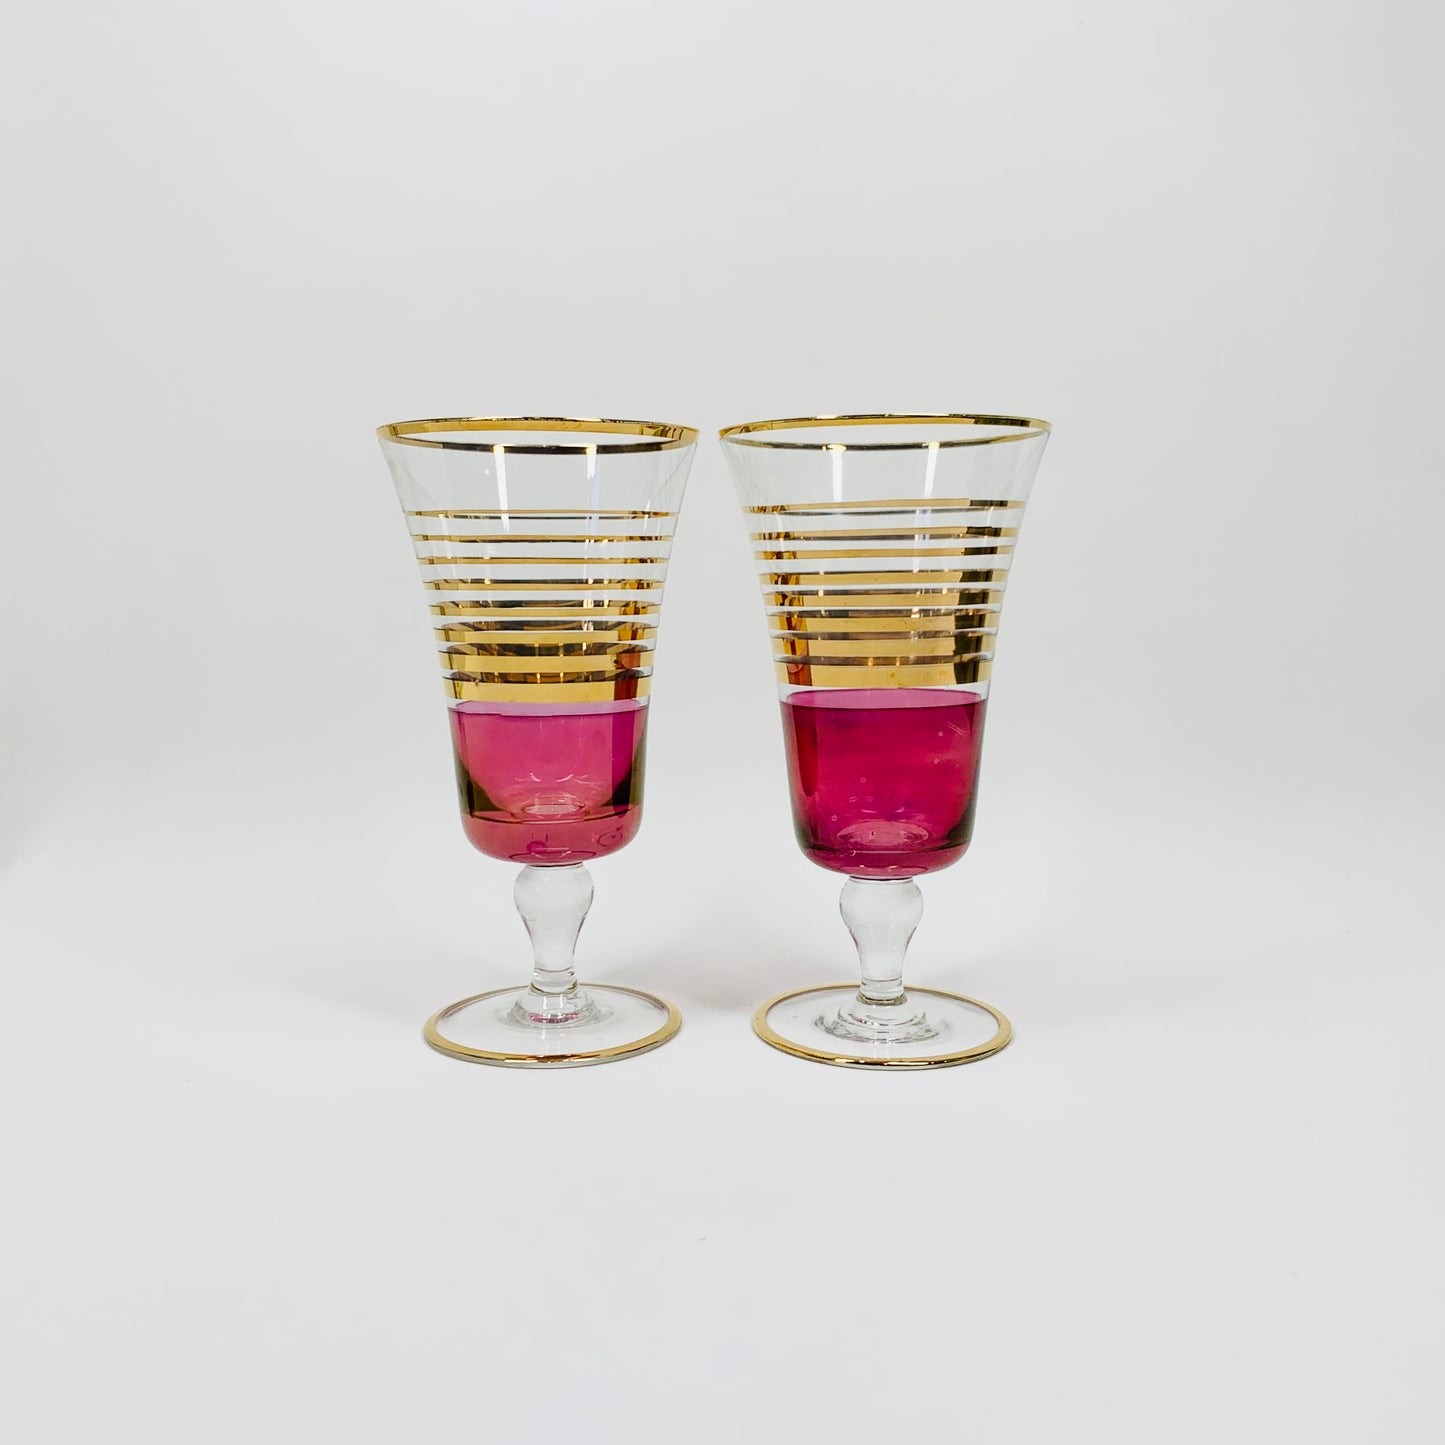 Extremely rare 1940s gold gilded pink flashed parfait/wine glasses